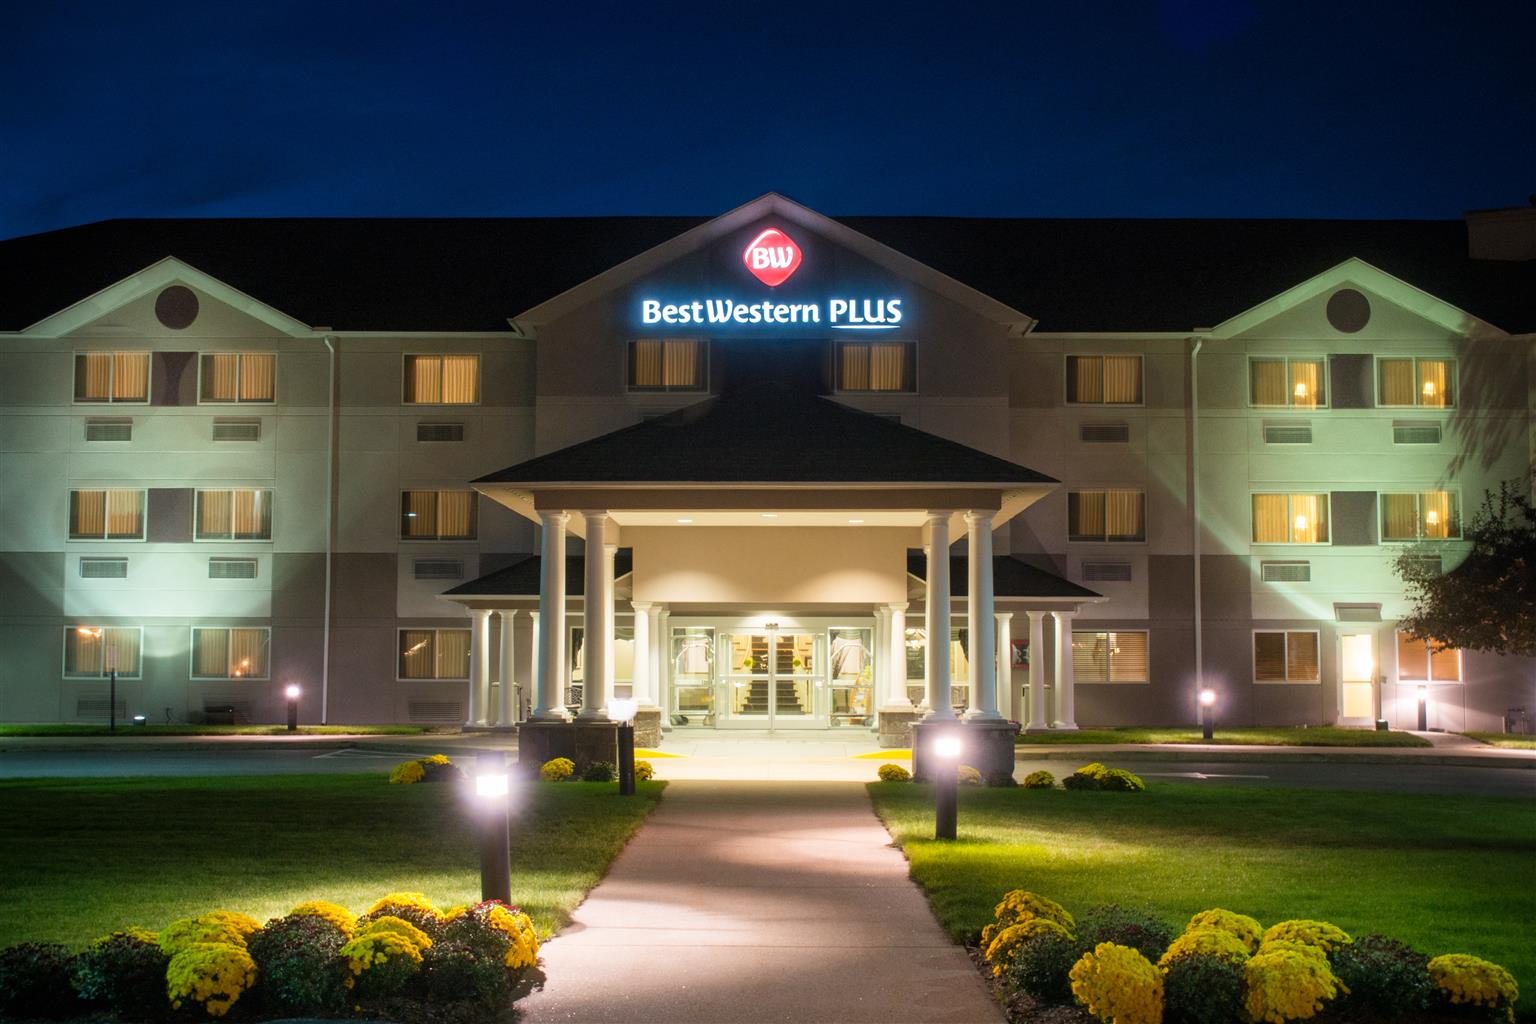 BEST WESTERN PLUS EXECUTIVE COURT INN & CONFERENCE CENTER